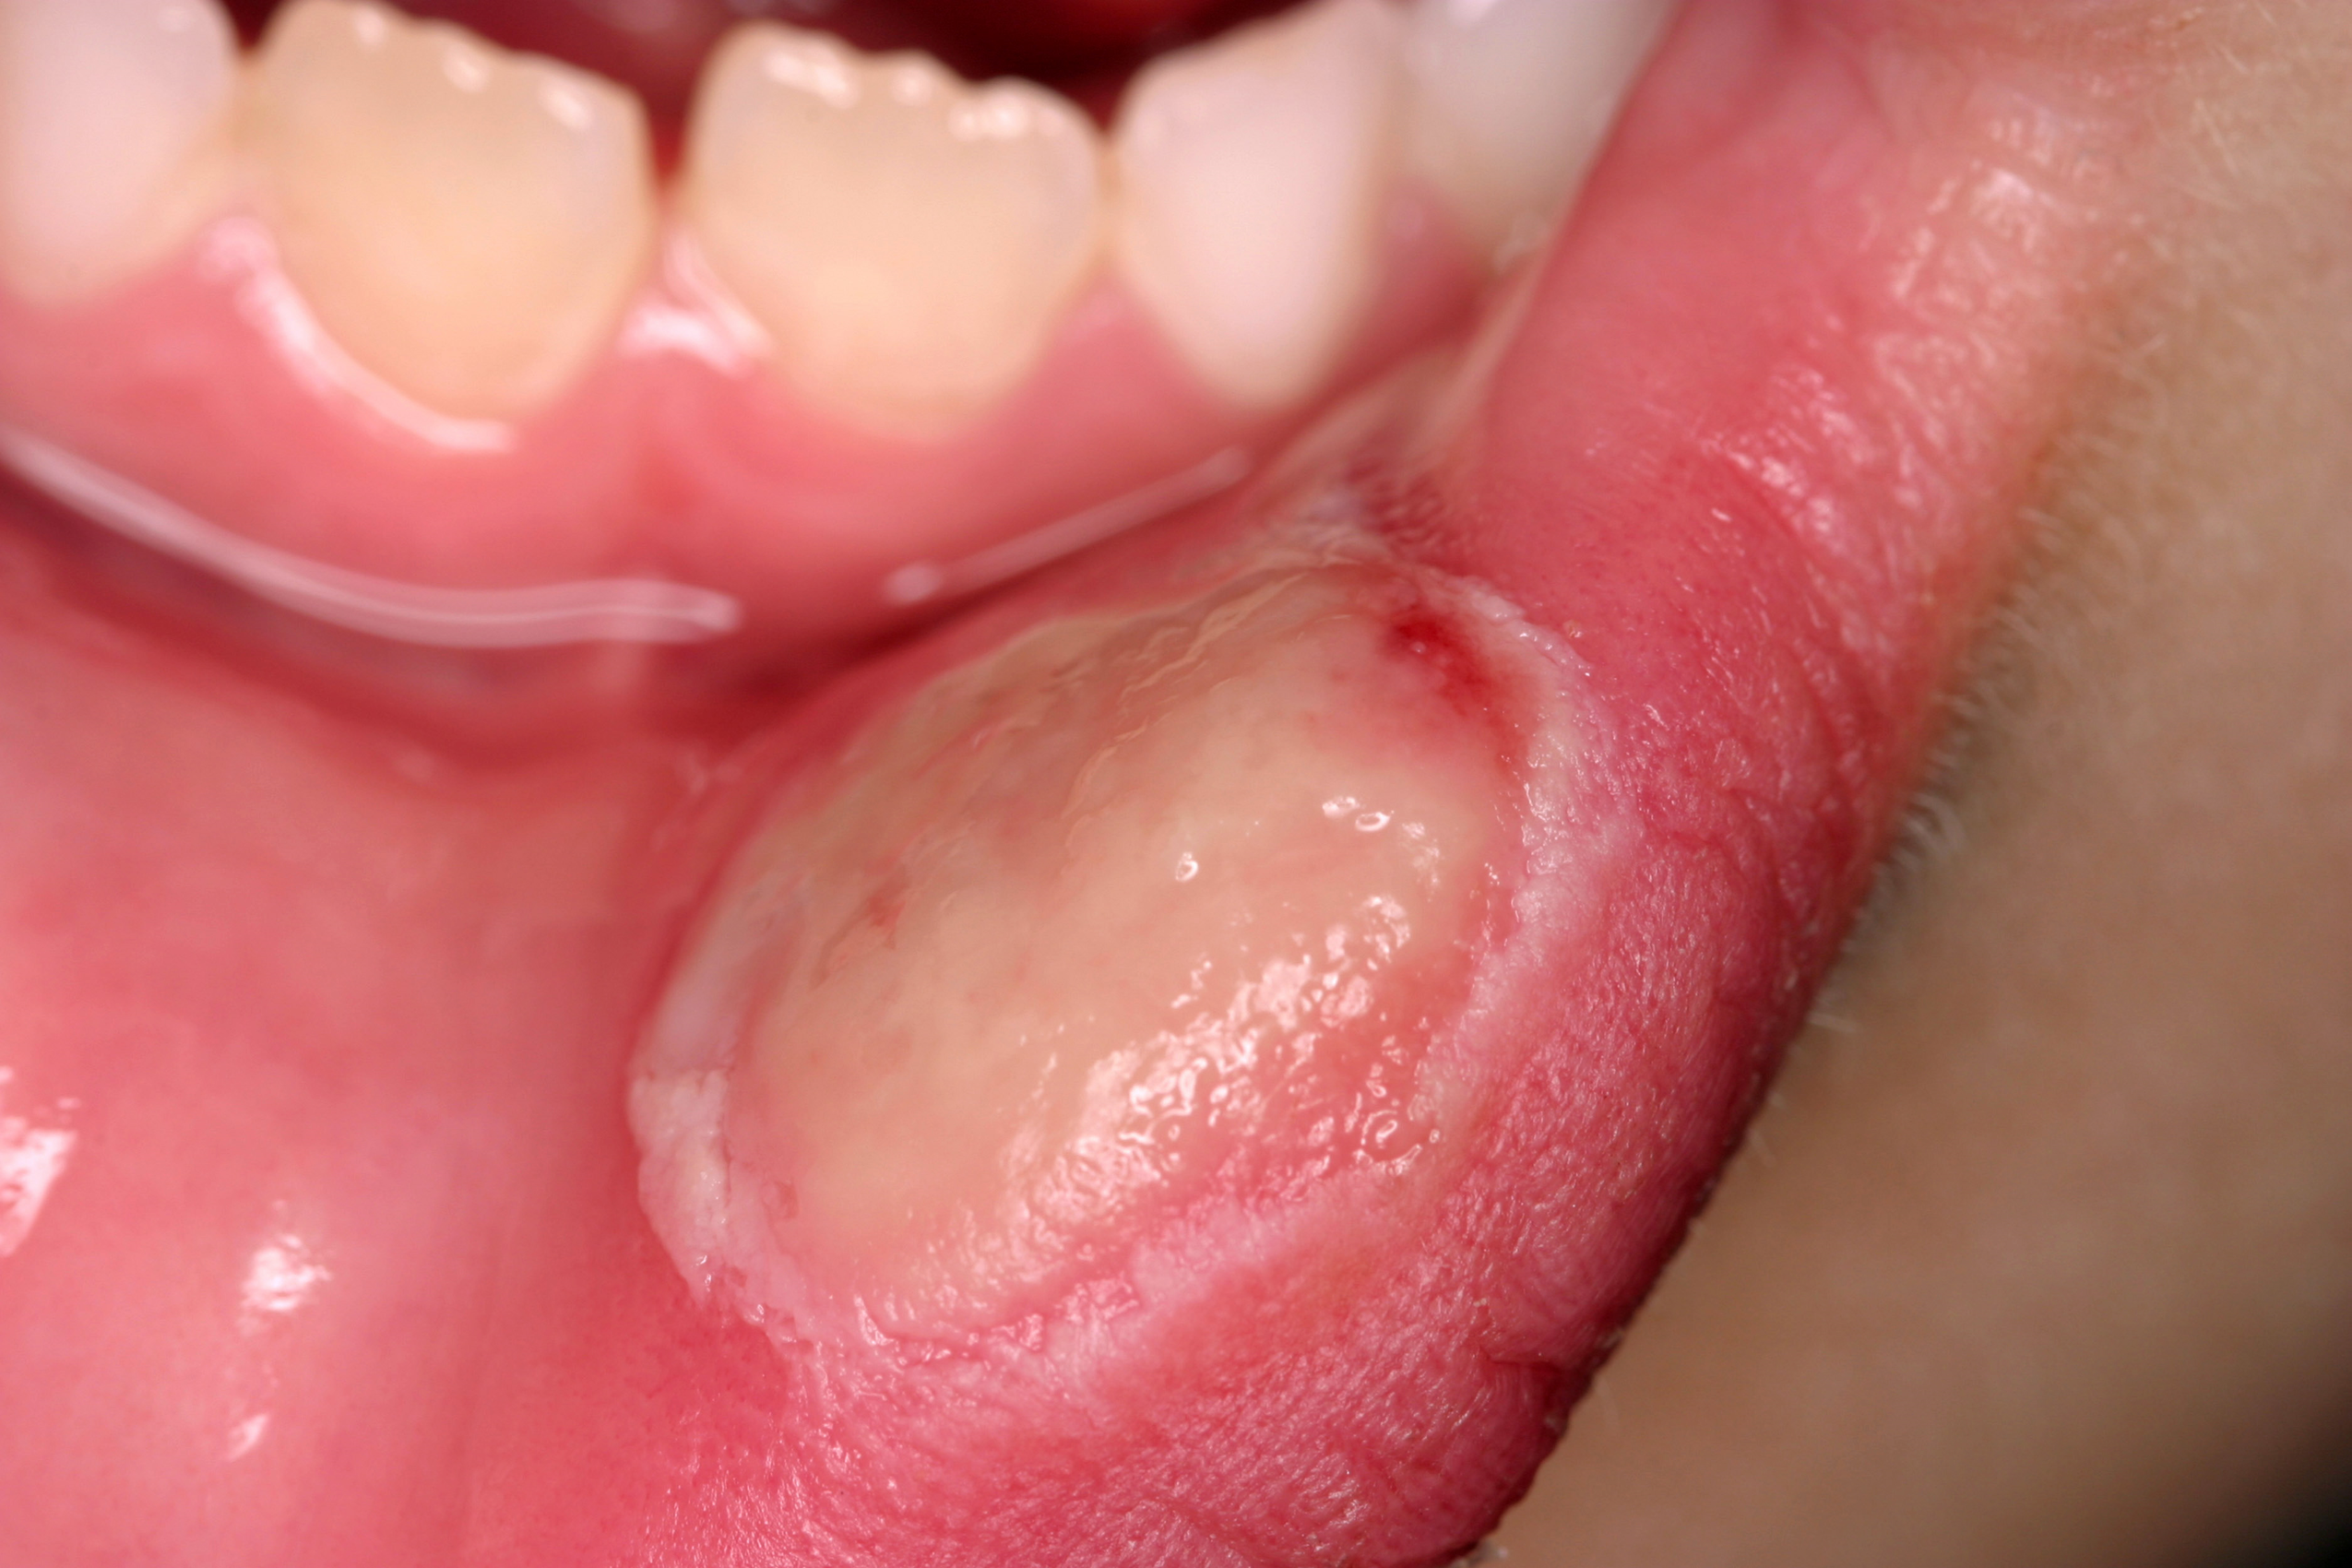 hpv cause mouth sores